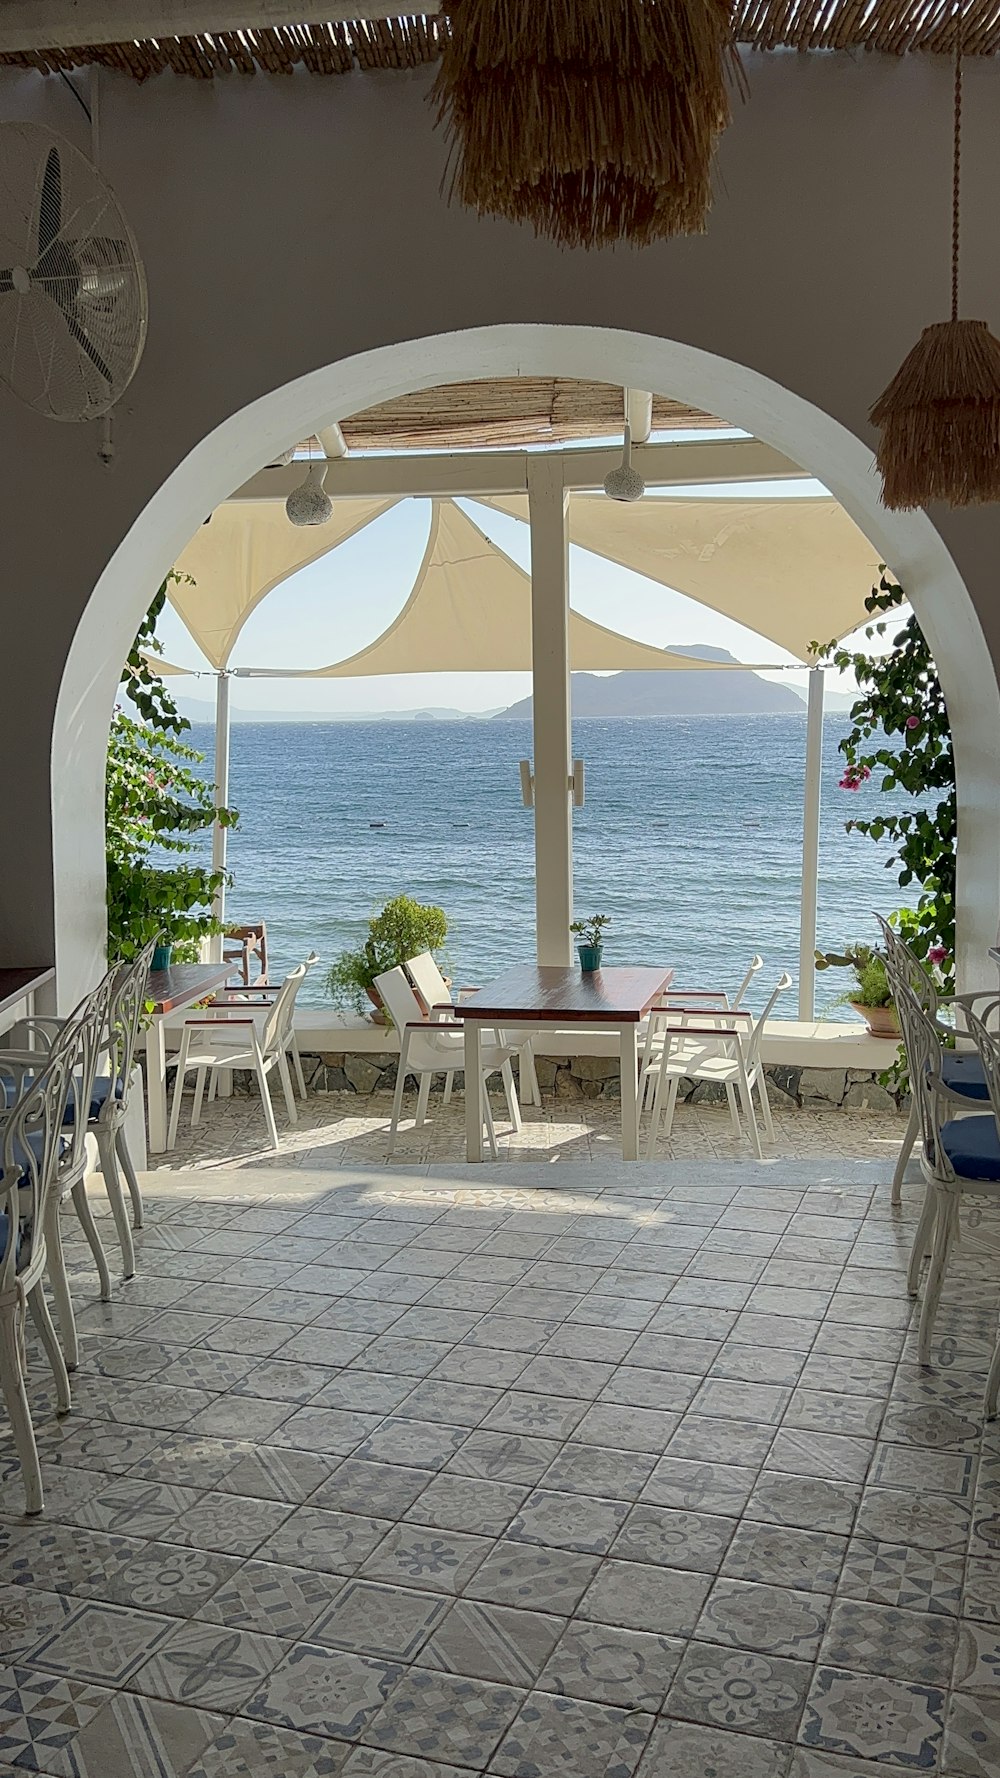 an outdoor dining area with a view of the ocean